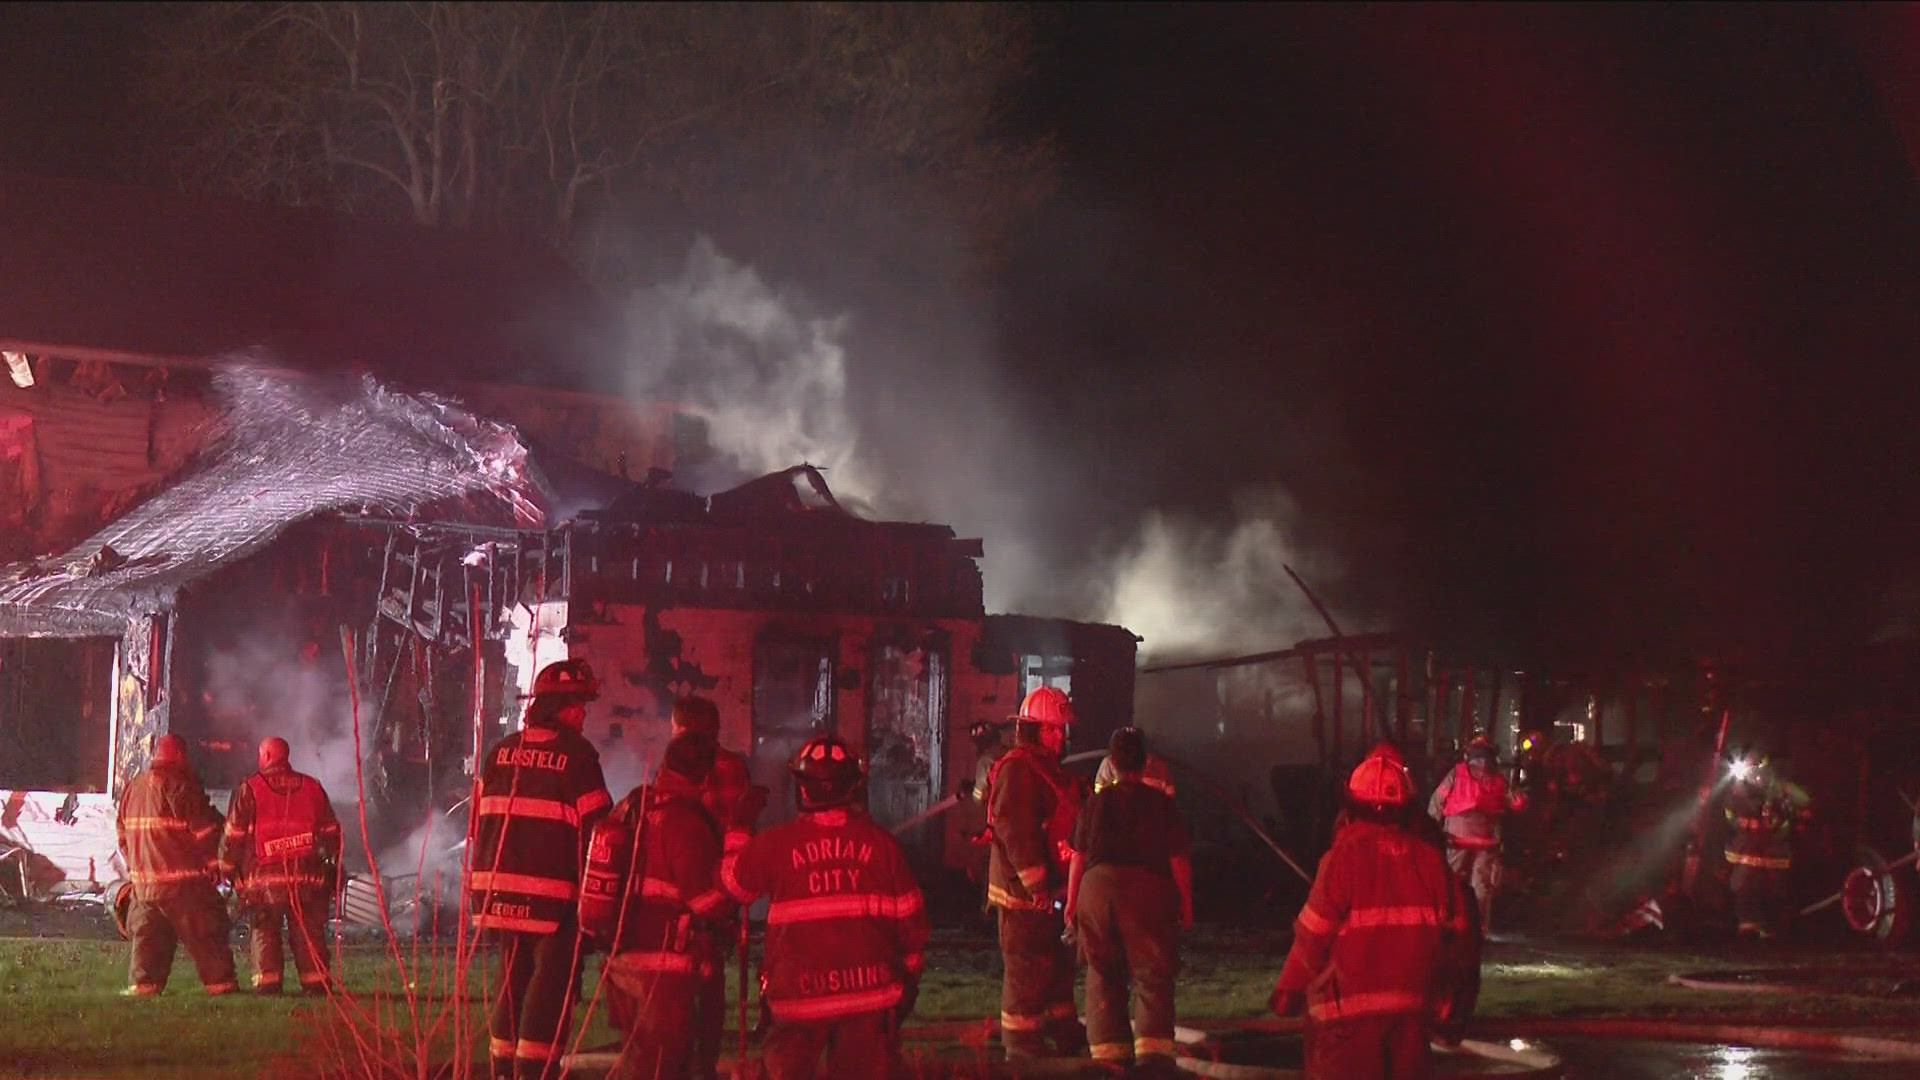 WTOL 11 was told one adult and two children made it out safely, and one firefighter was assessed at the scene.